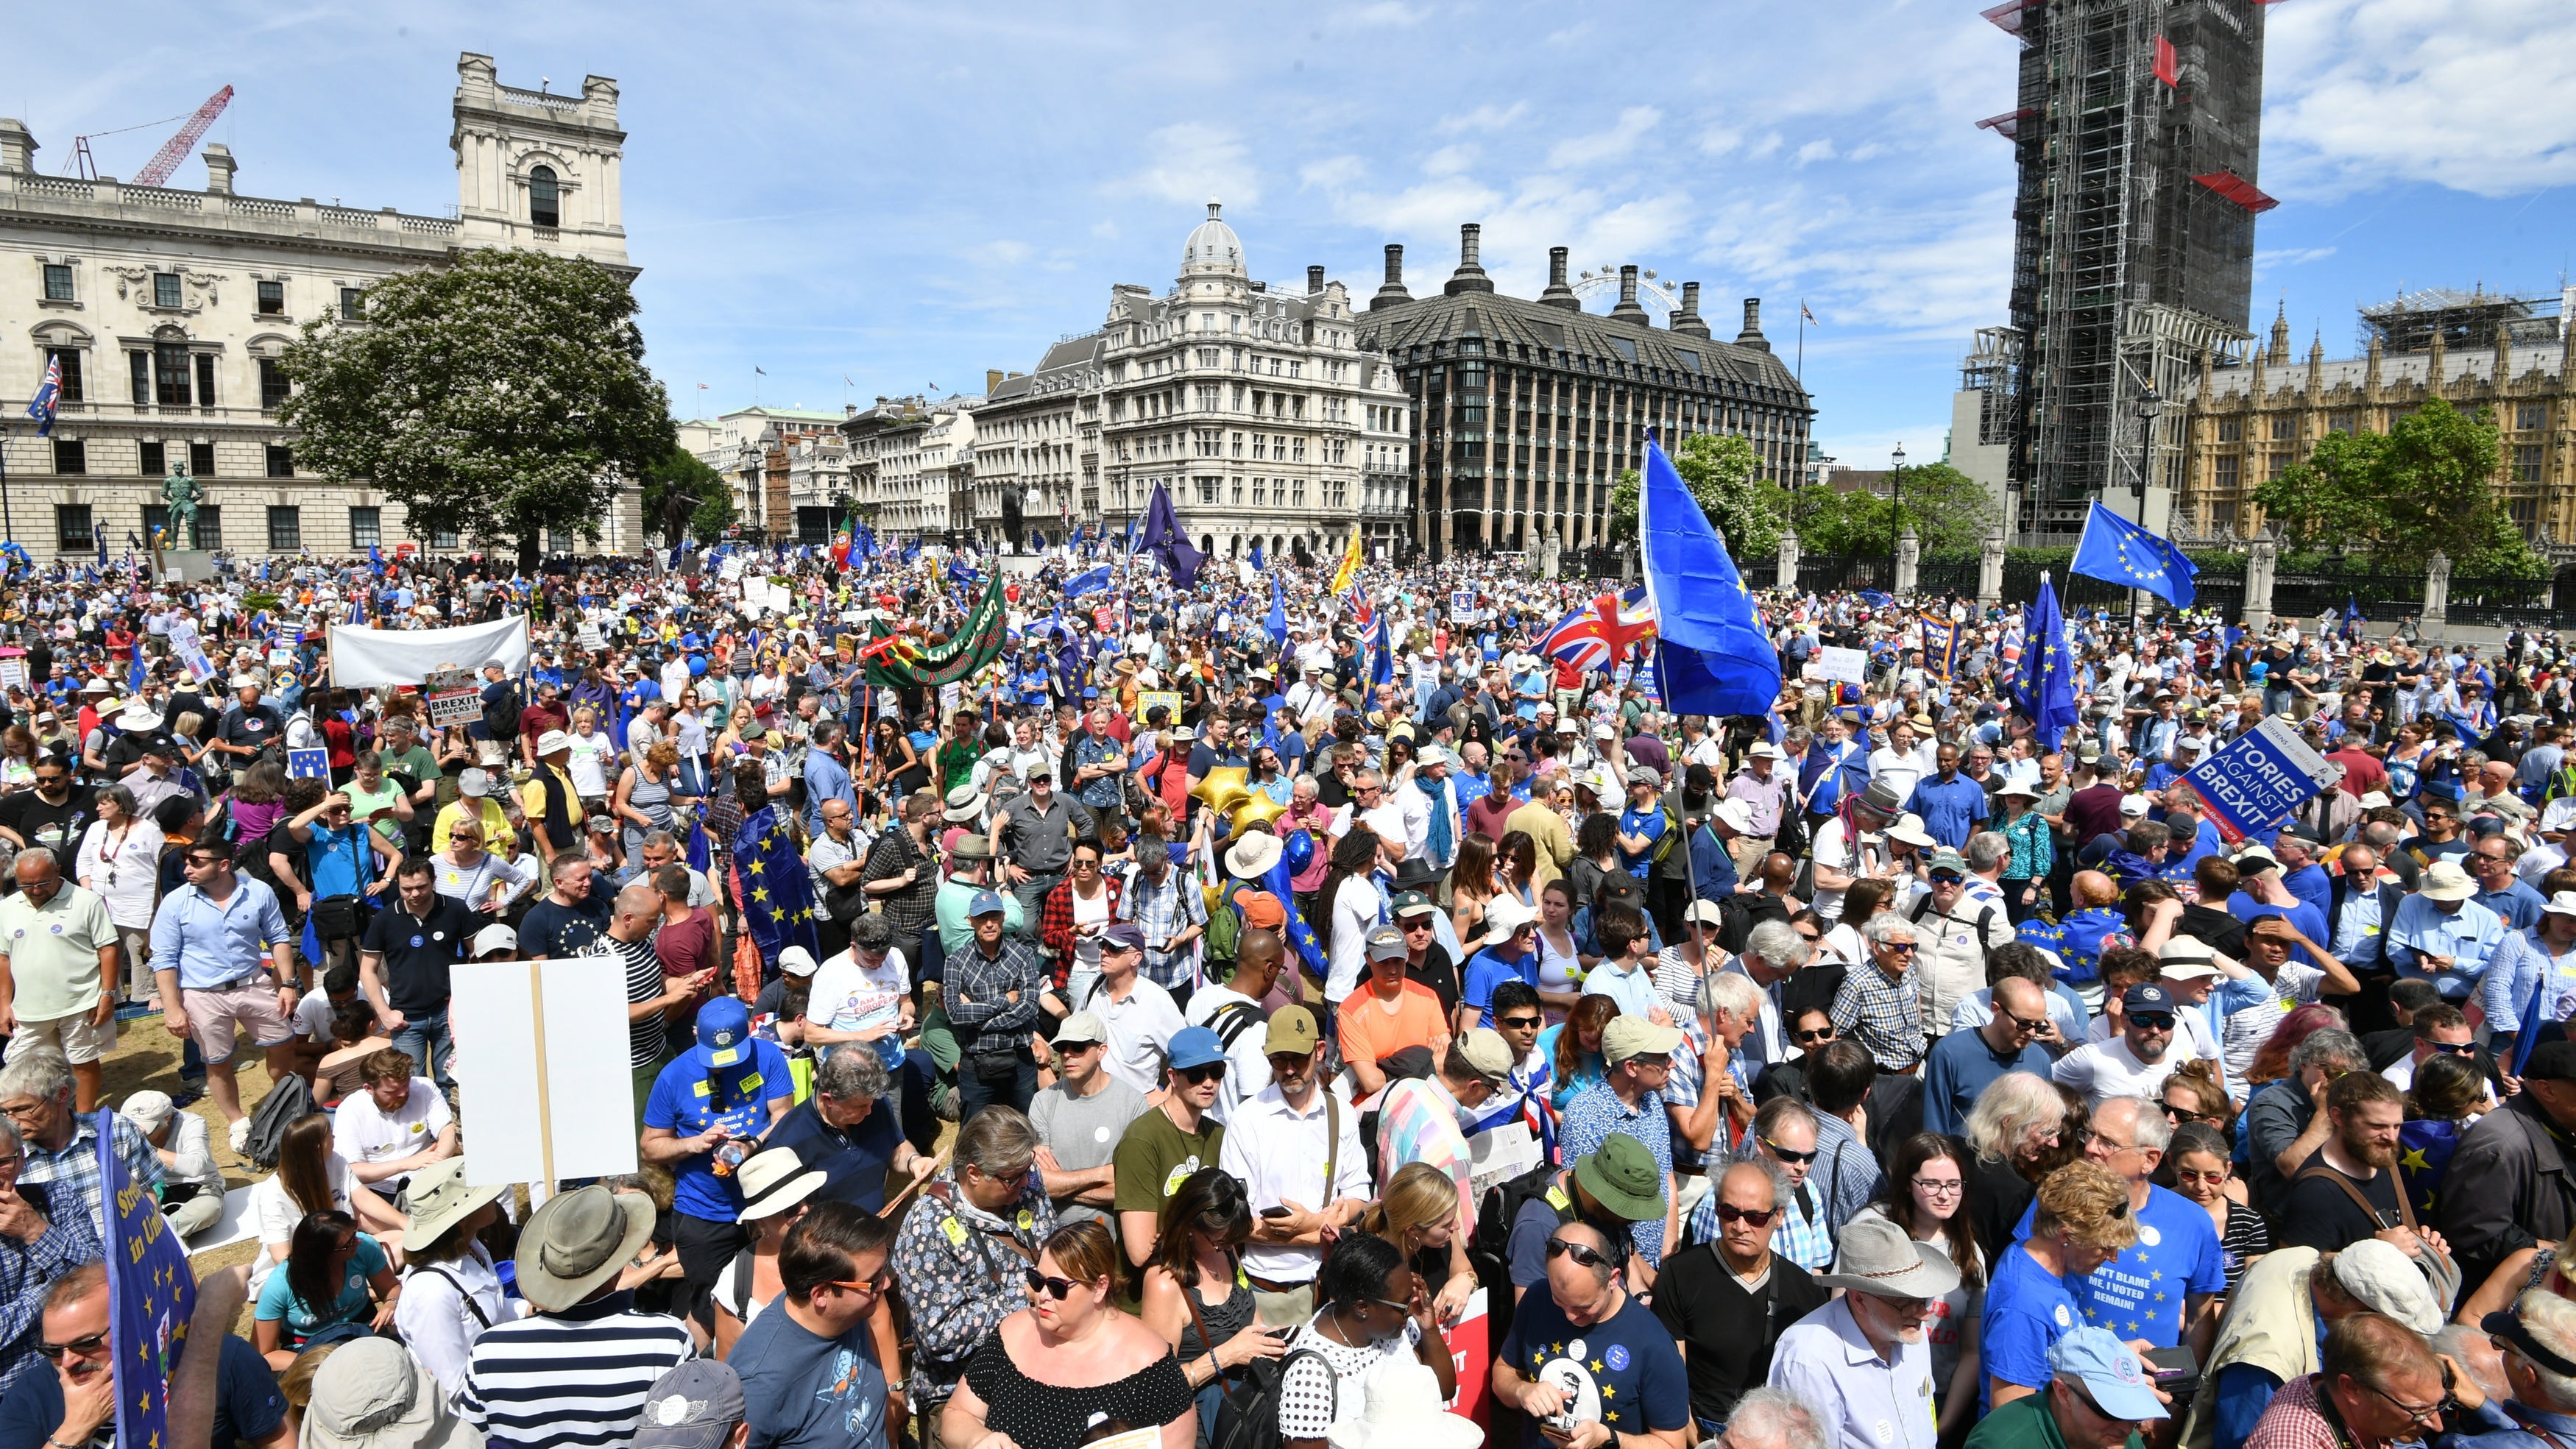 thousands-march-in-london-to-demand-referendum-on-brexit-deal-136427974096802601-180623150038.jpg